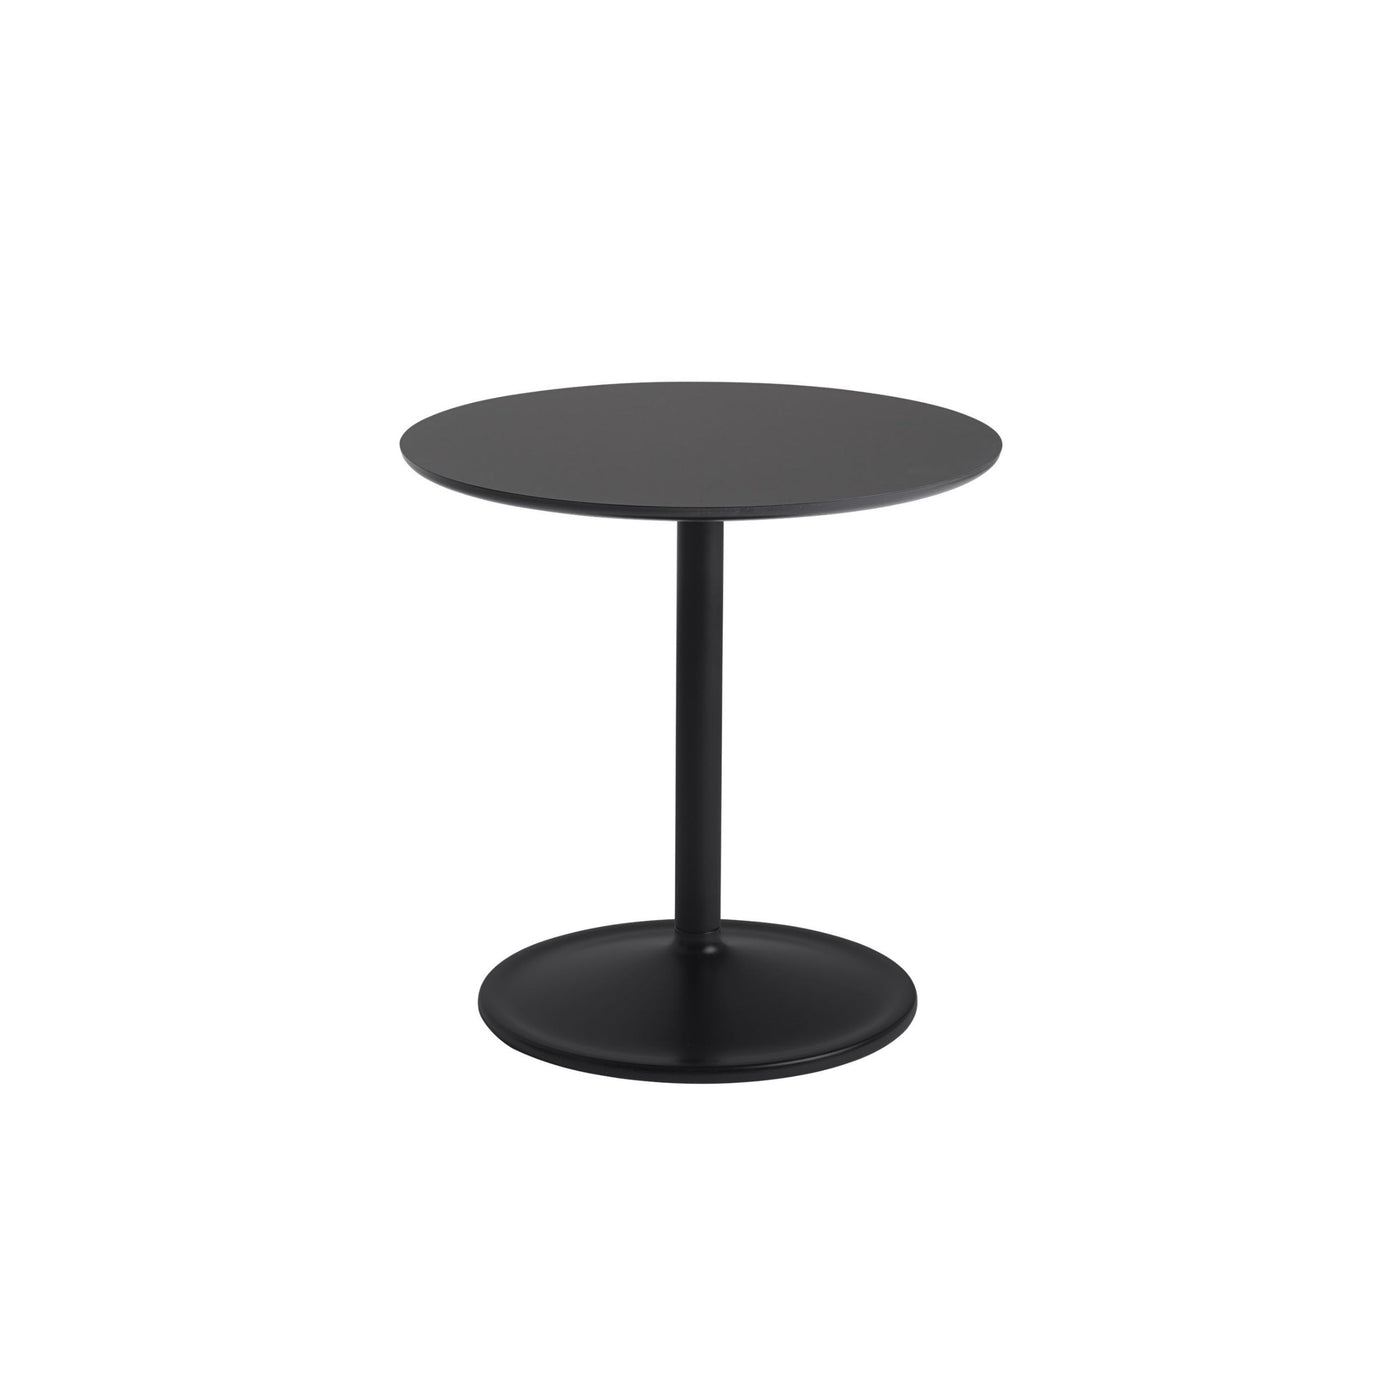 Muuto Soft side table Ø48 x 48cm high. Shop online at someday designs. #colour_black